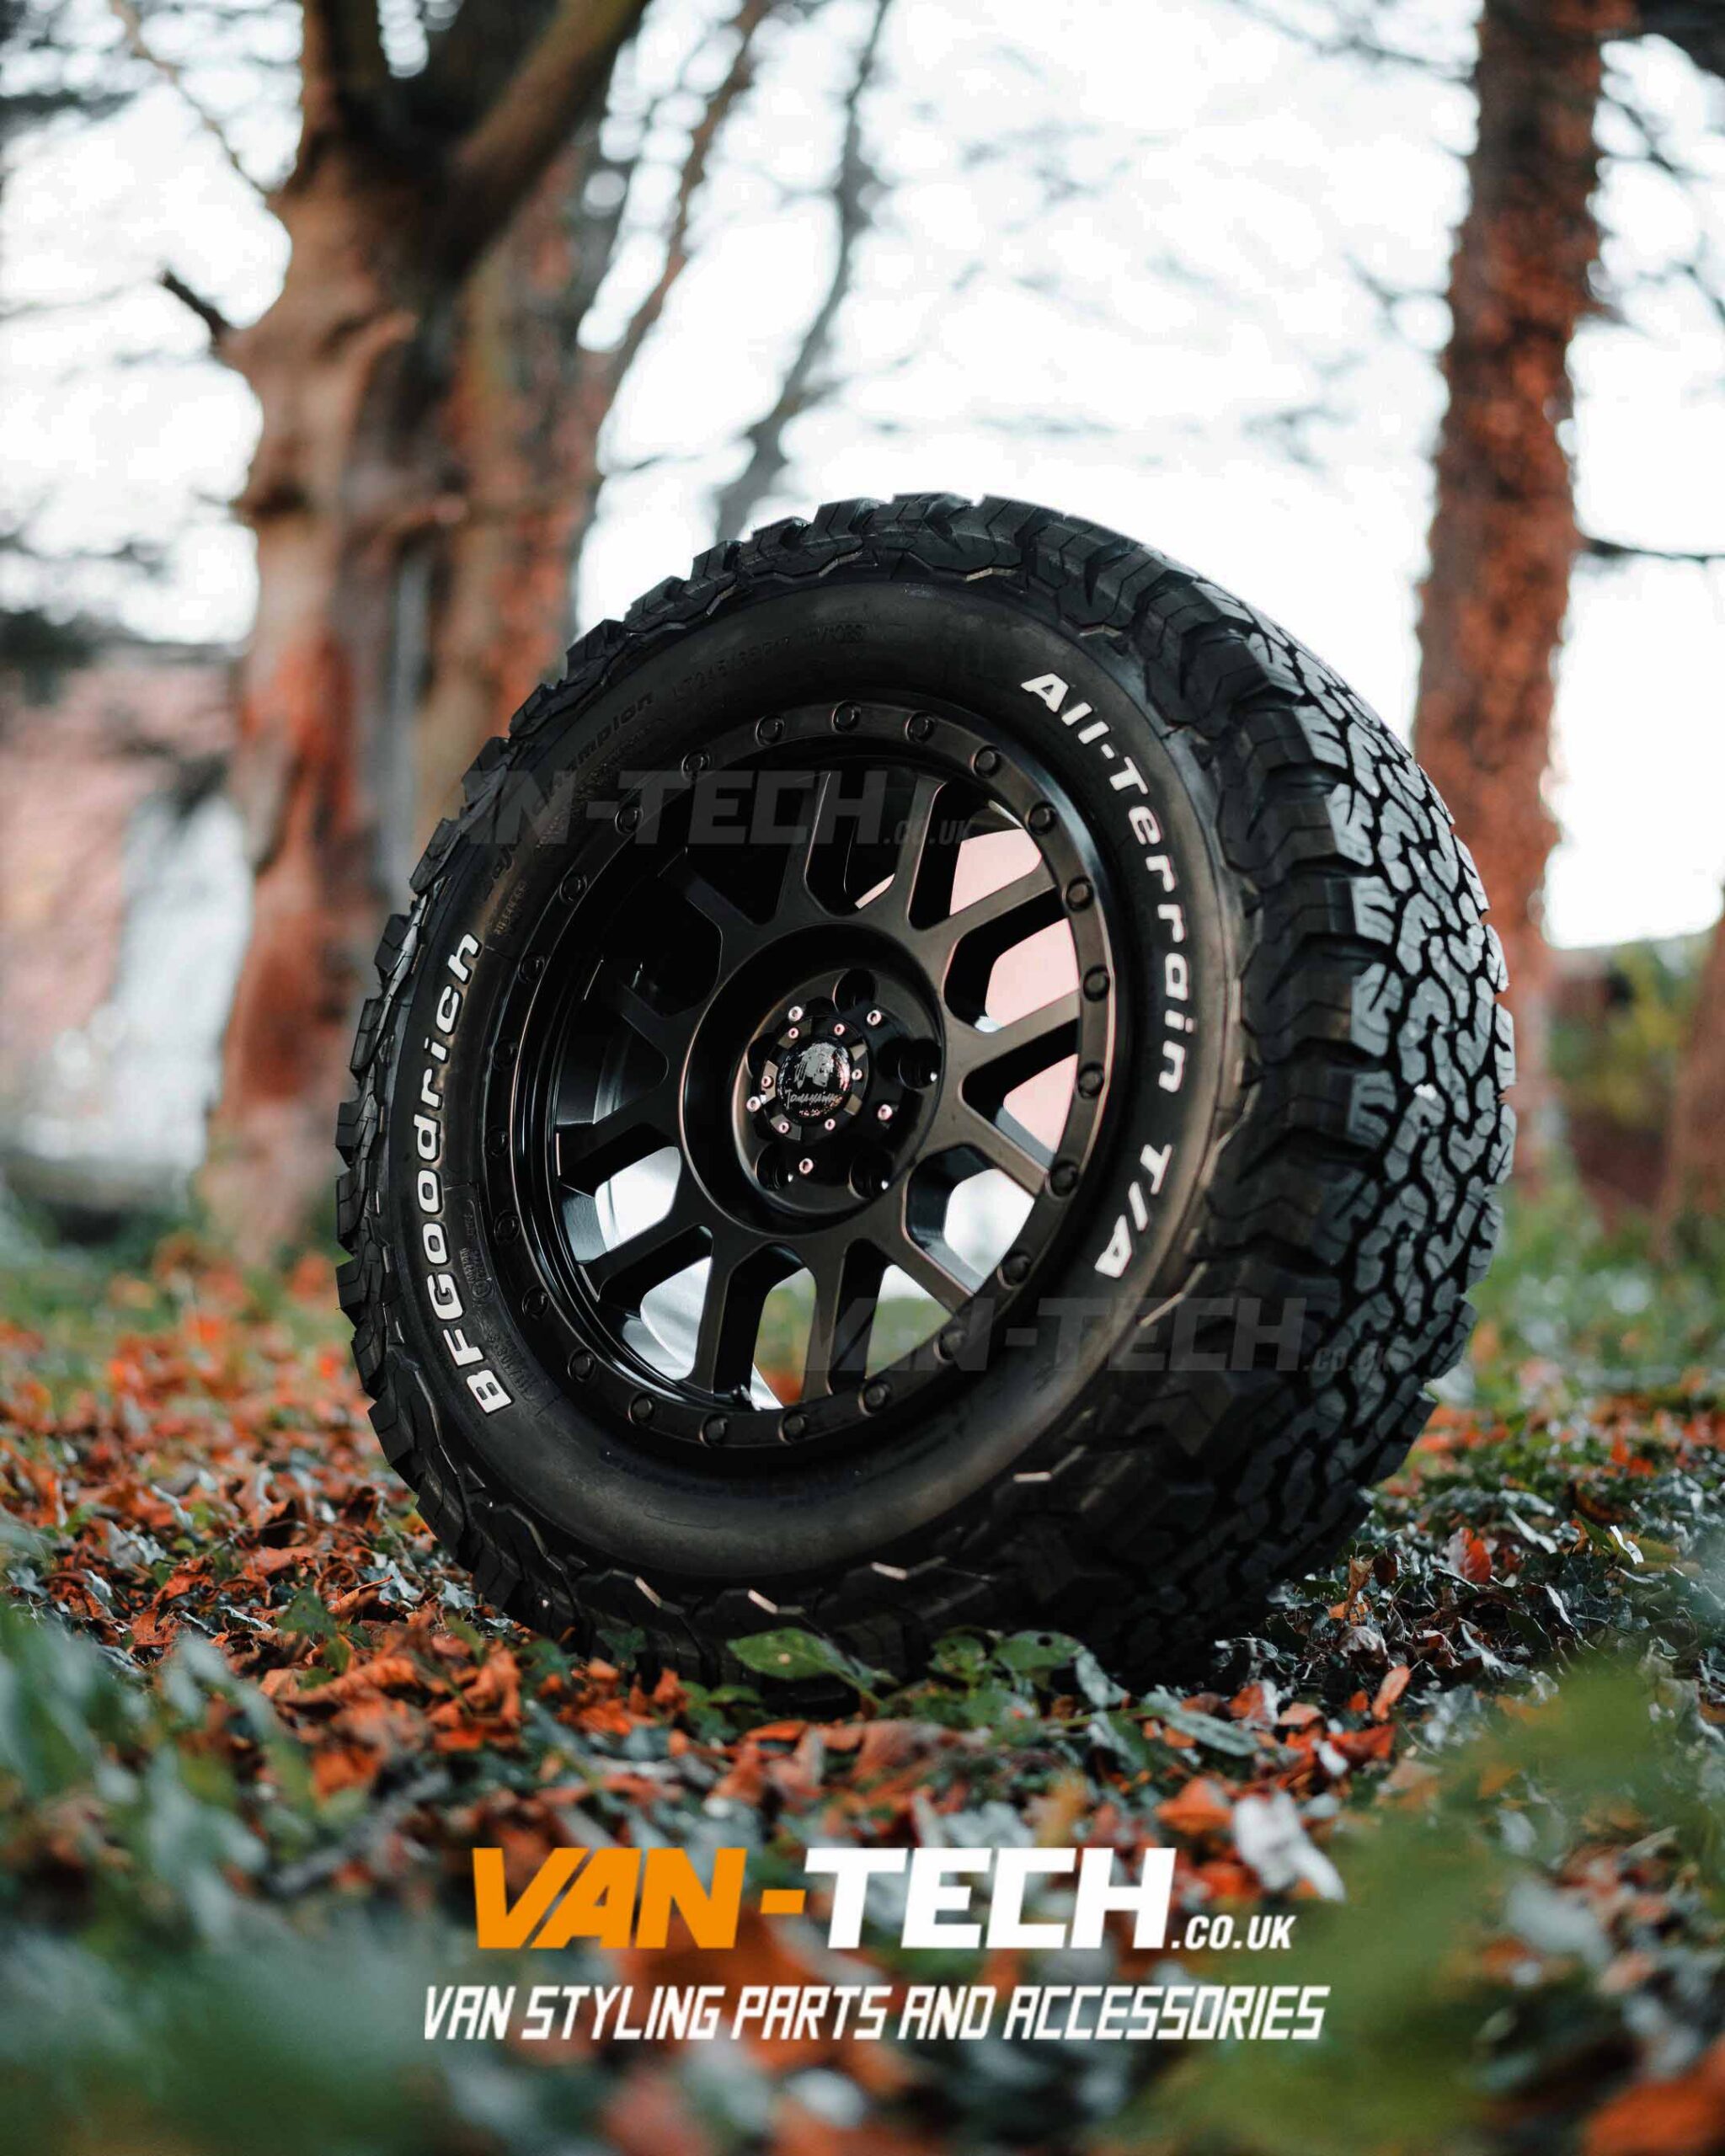 VW Transporter Swamper Alloy Wheel and All Terrain Tyre Packages available at Van-Tech